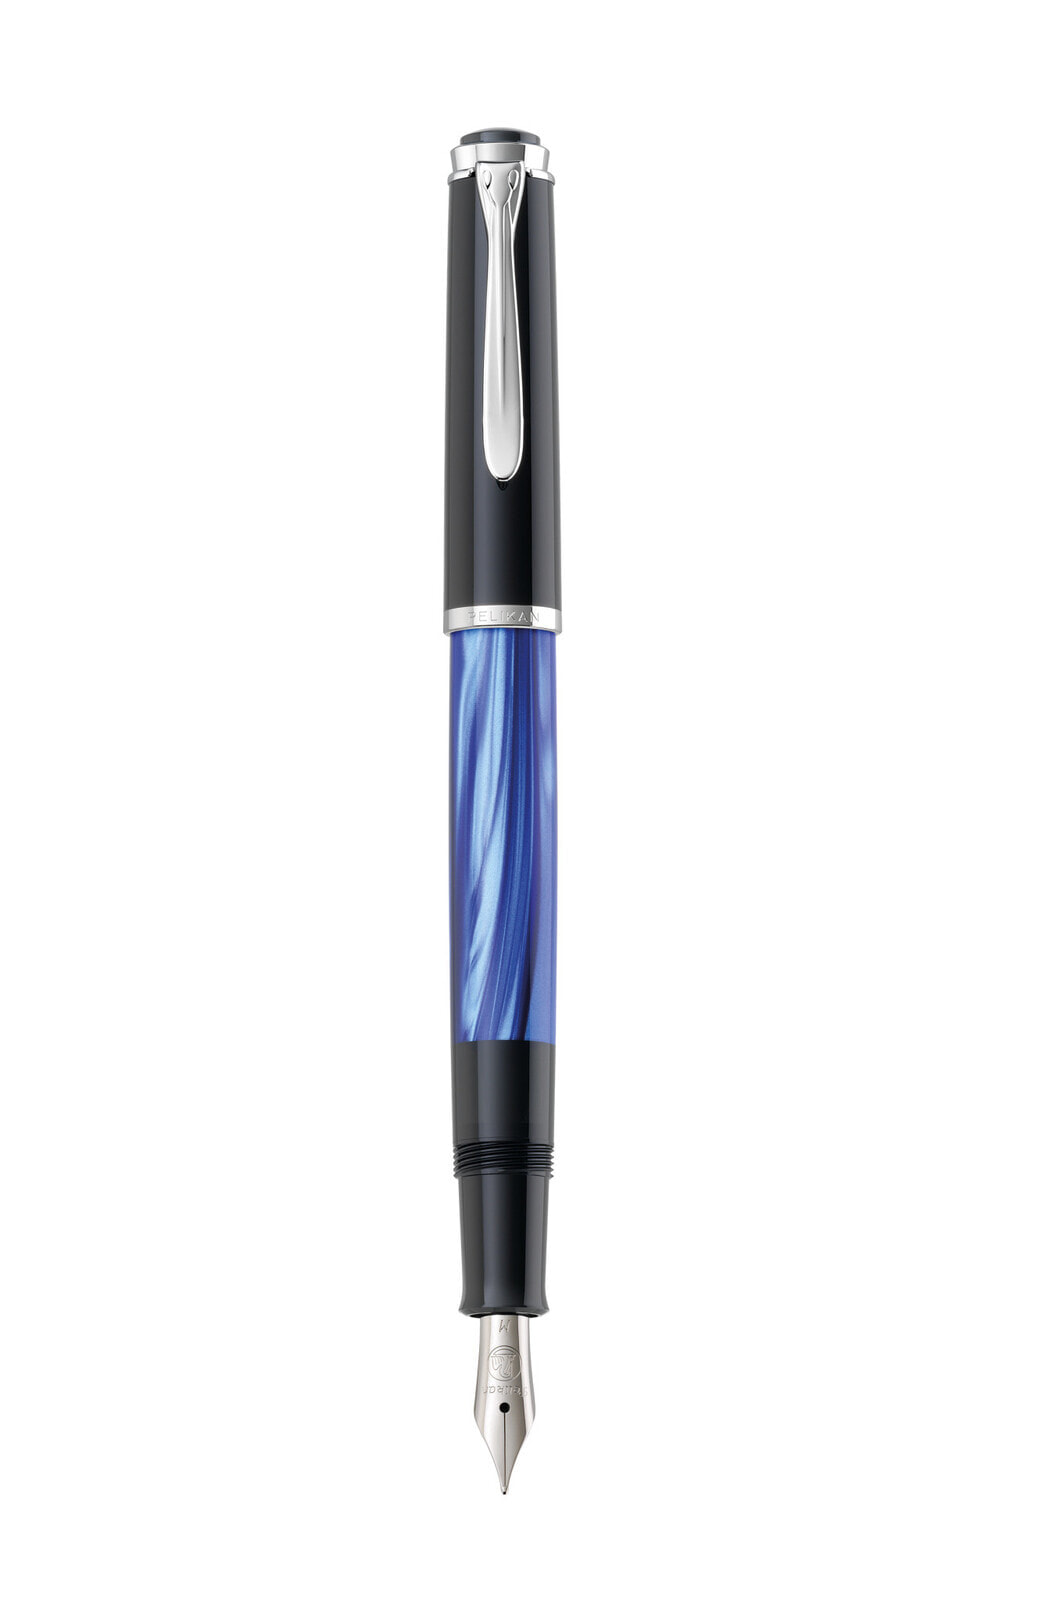 M205 - Black - Blue - Marble colour - Silver - Built-in filling system - Resin - Italic nib - Stainless steel - Fine